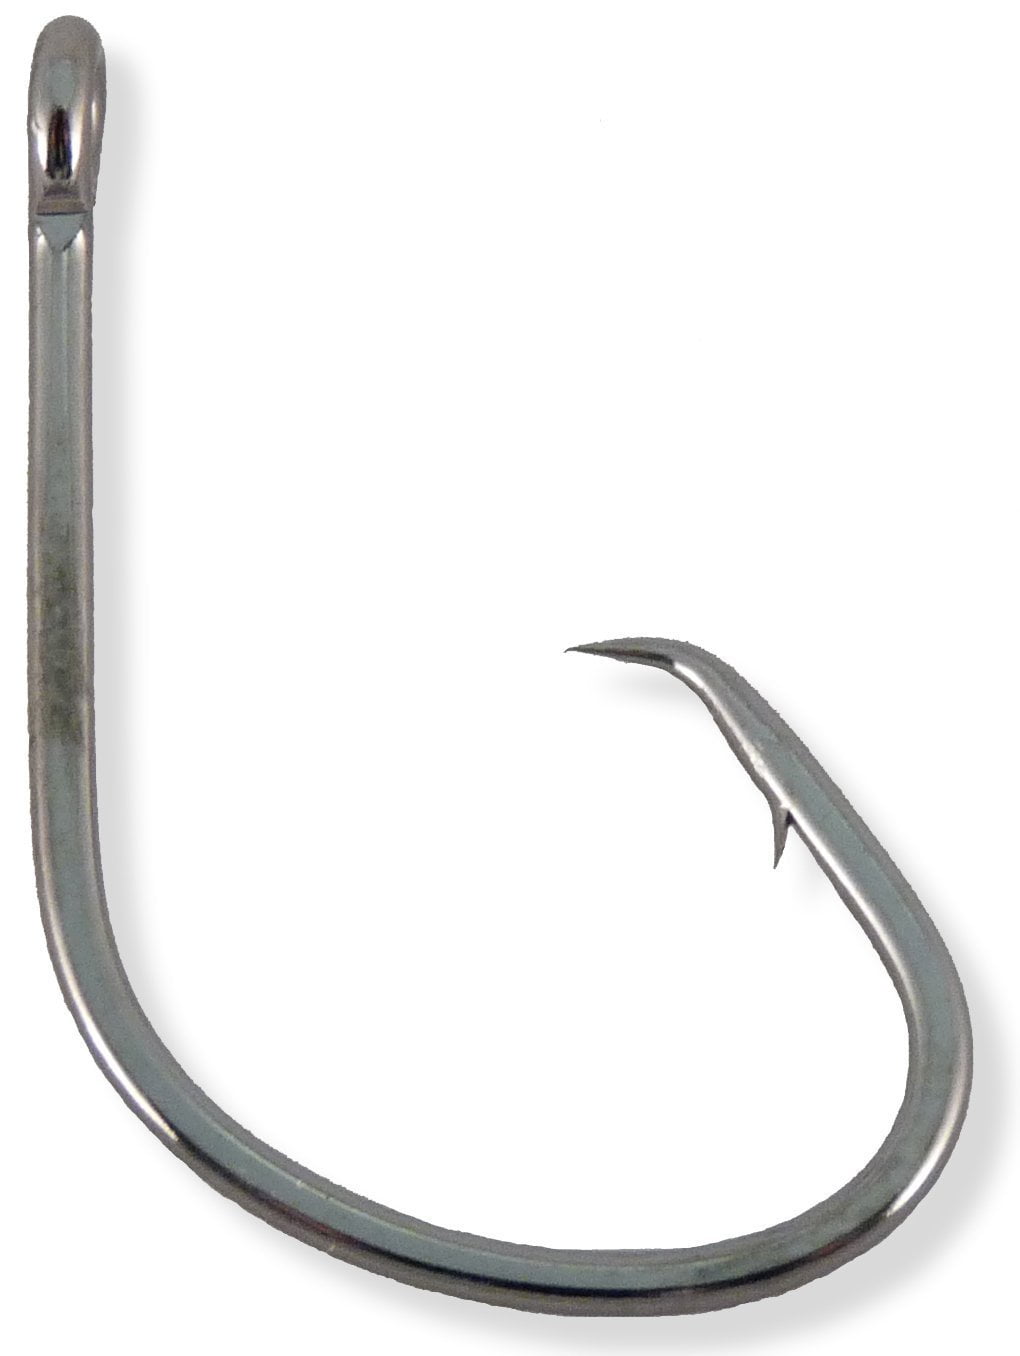 Owner S-125 Plugging Single Hook for Minnows 51781| Size: 4/0-7/0